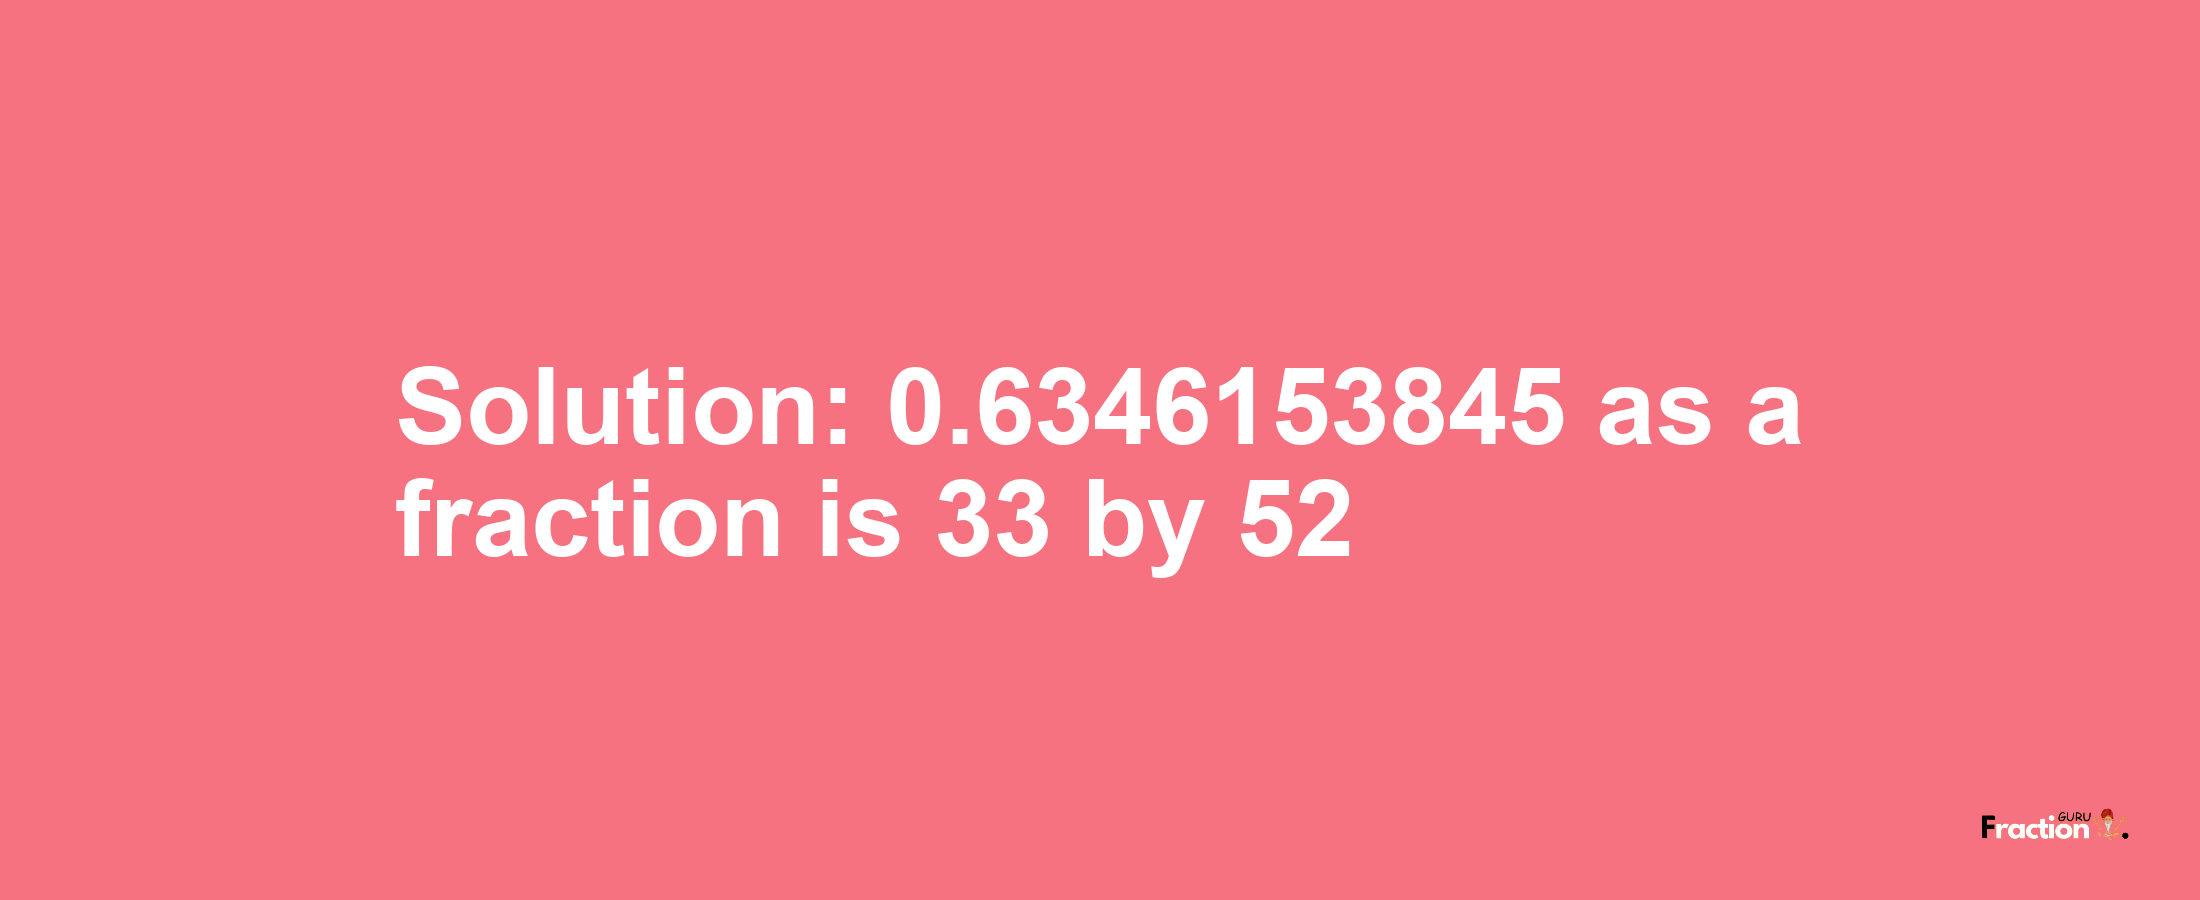 Solution:0.6346153845 as a fraction is 33/52